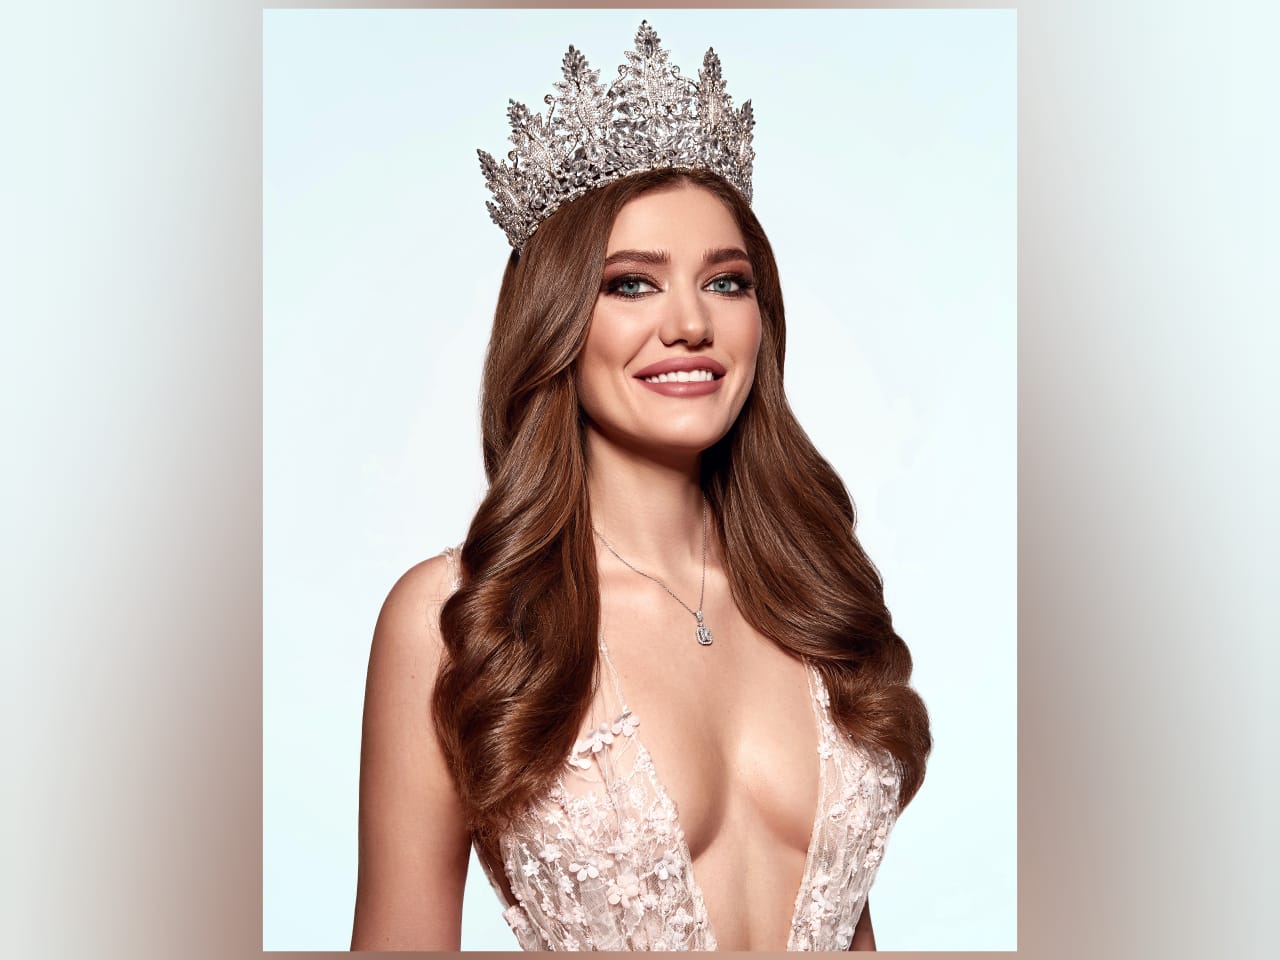 Yastremskaya Will Compete for the Title of Miss Universe